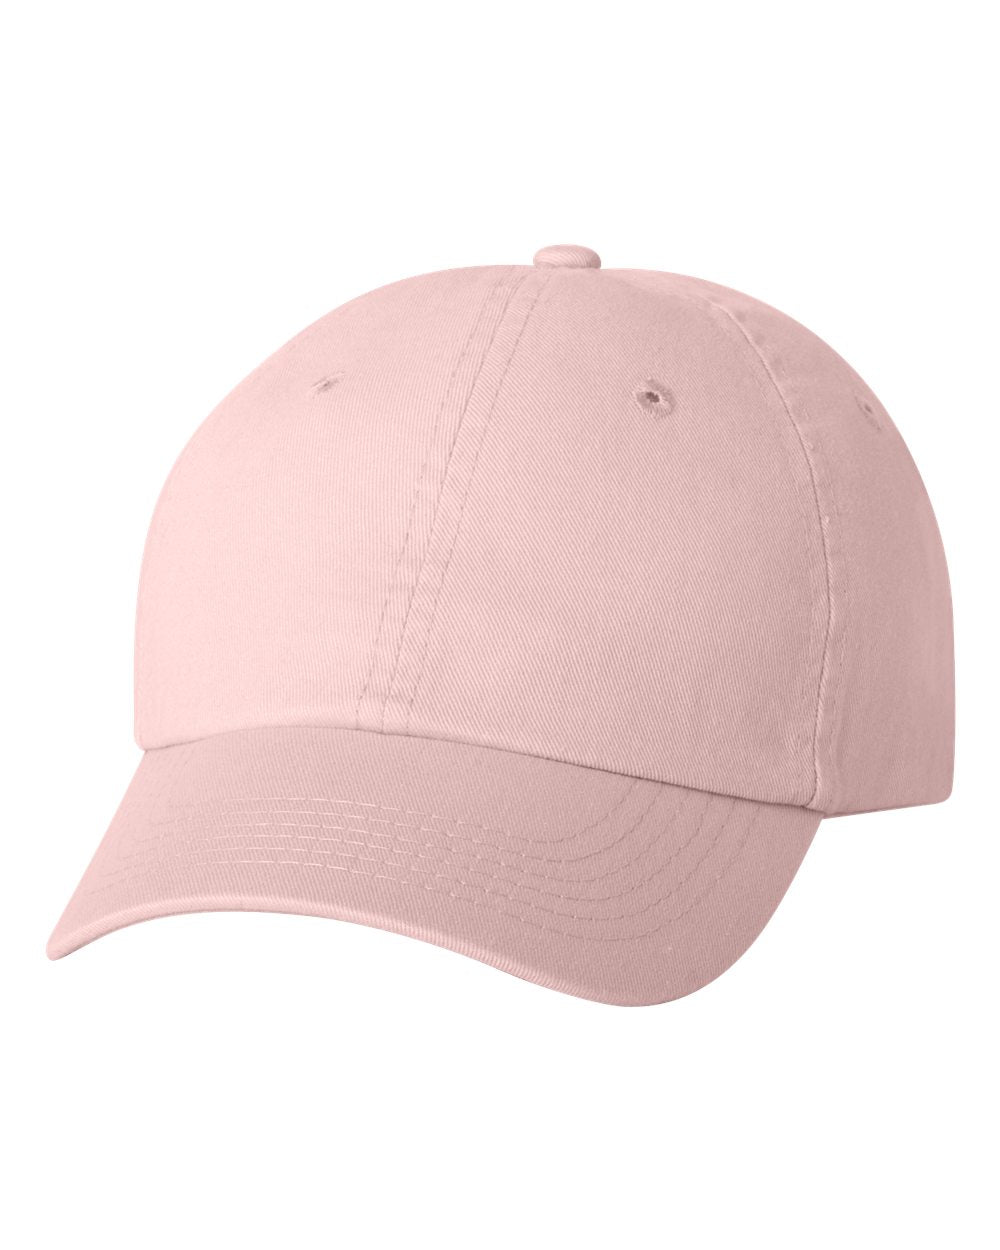 valucap small fit youth dad cap light pink